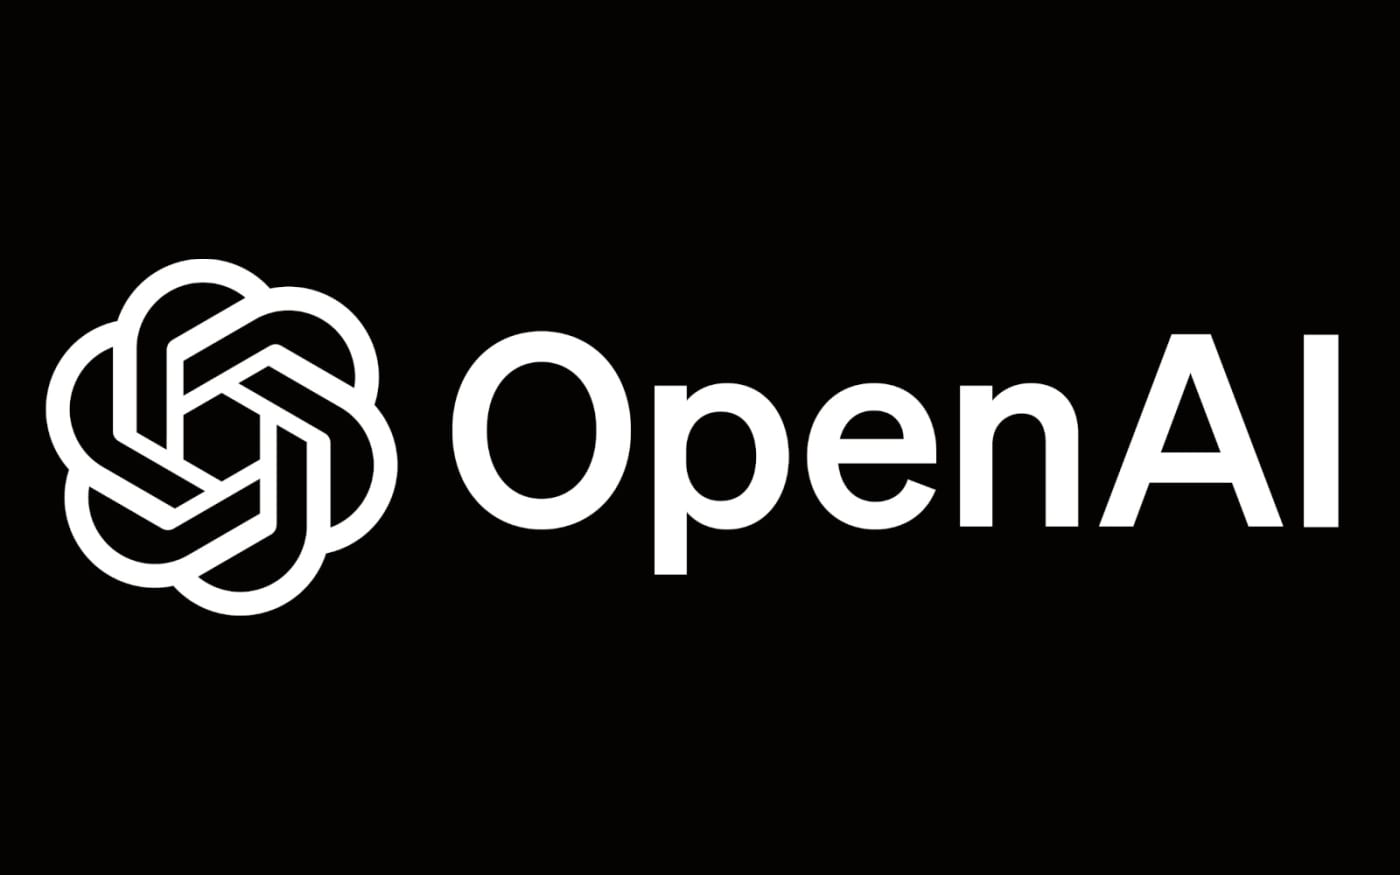 OpenAI scraps controversial nondisparagement agreement with employees